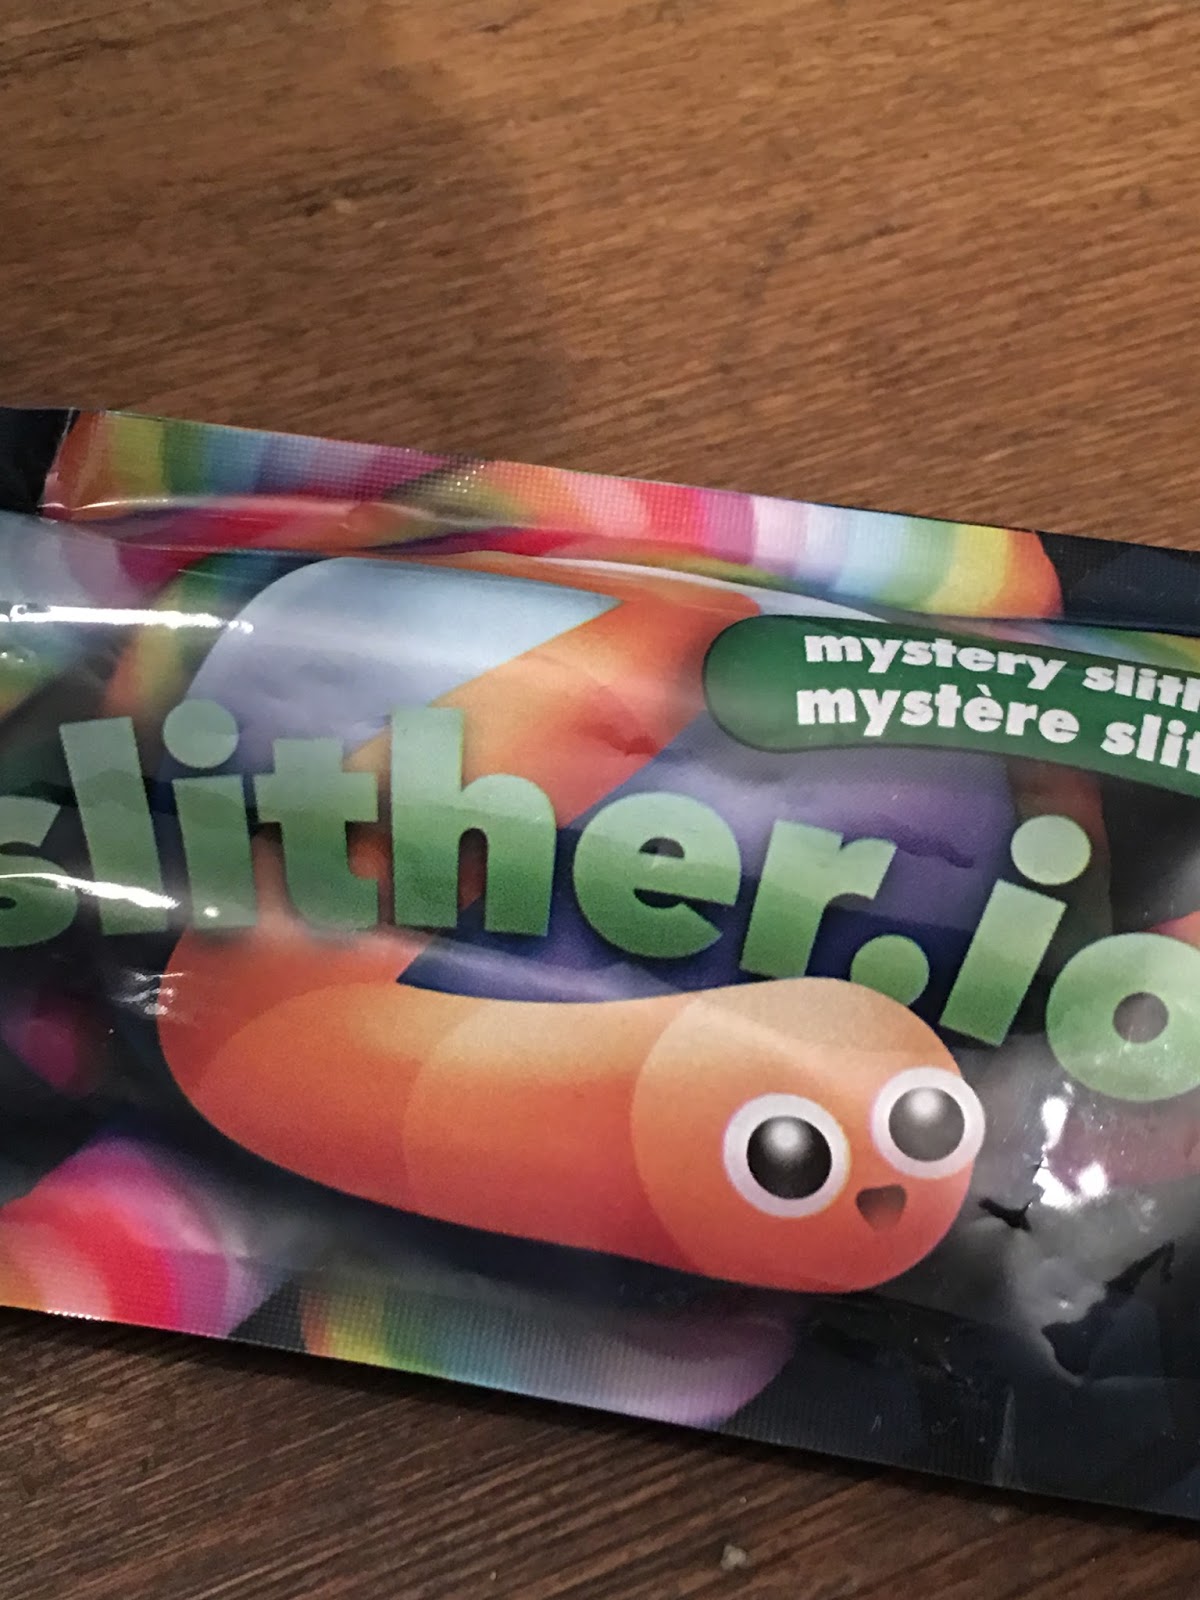 Slither.io Mystery Pack 